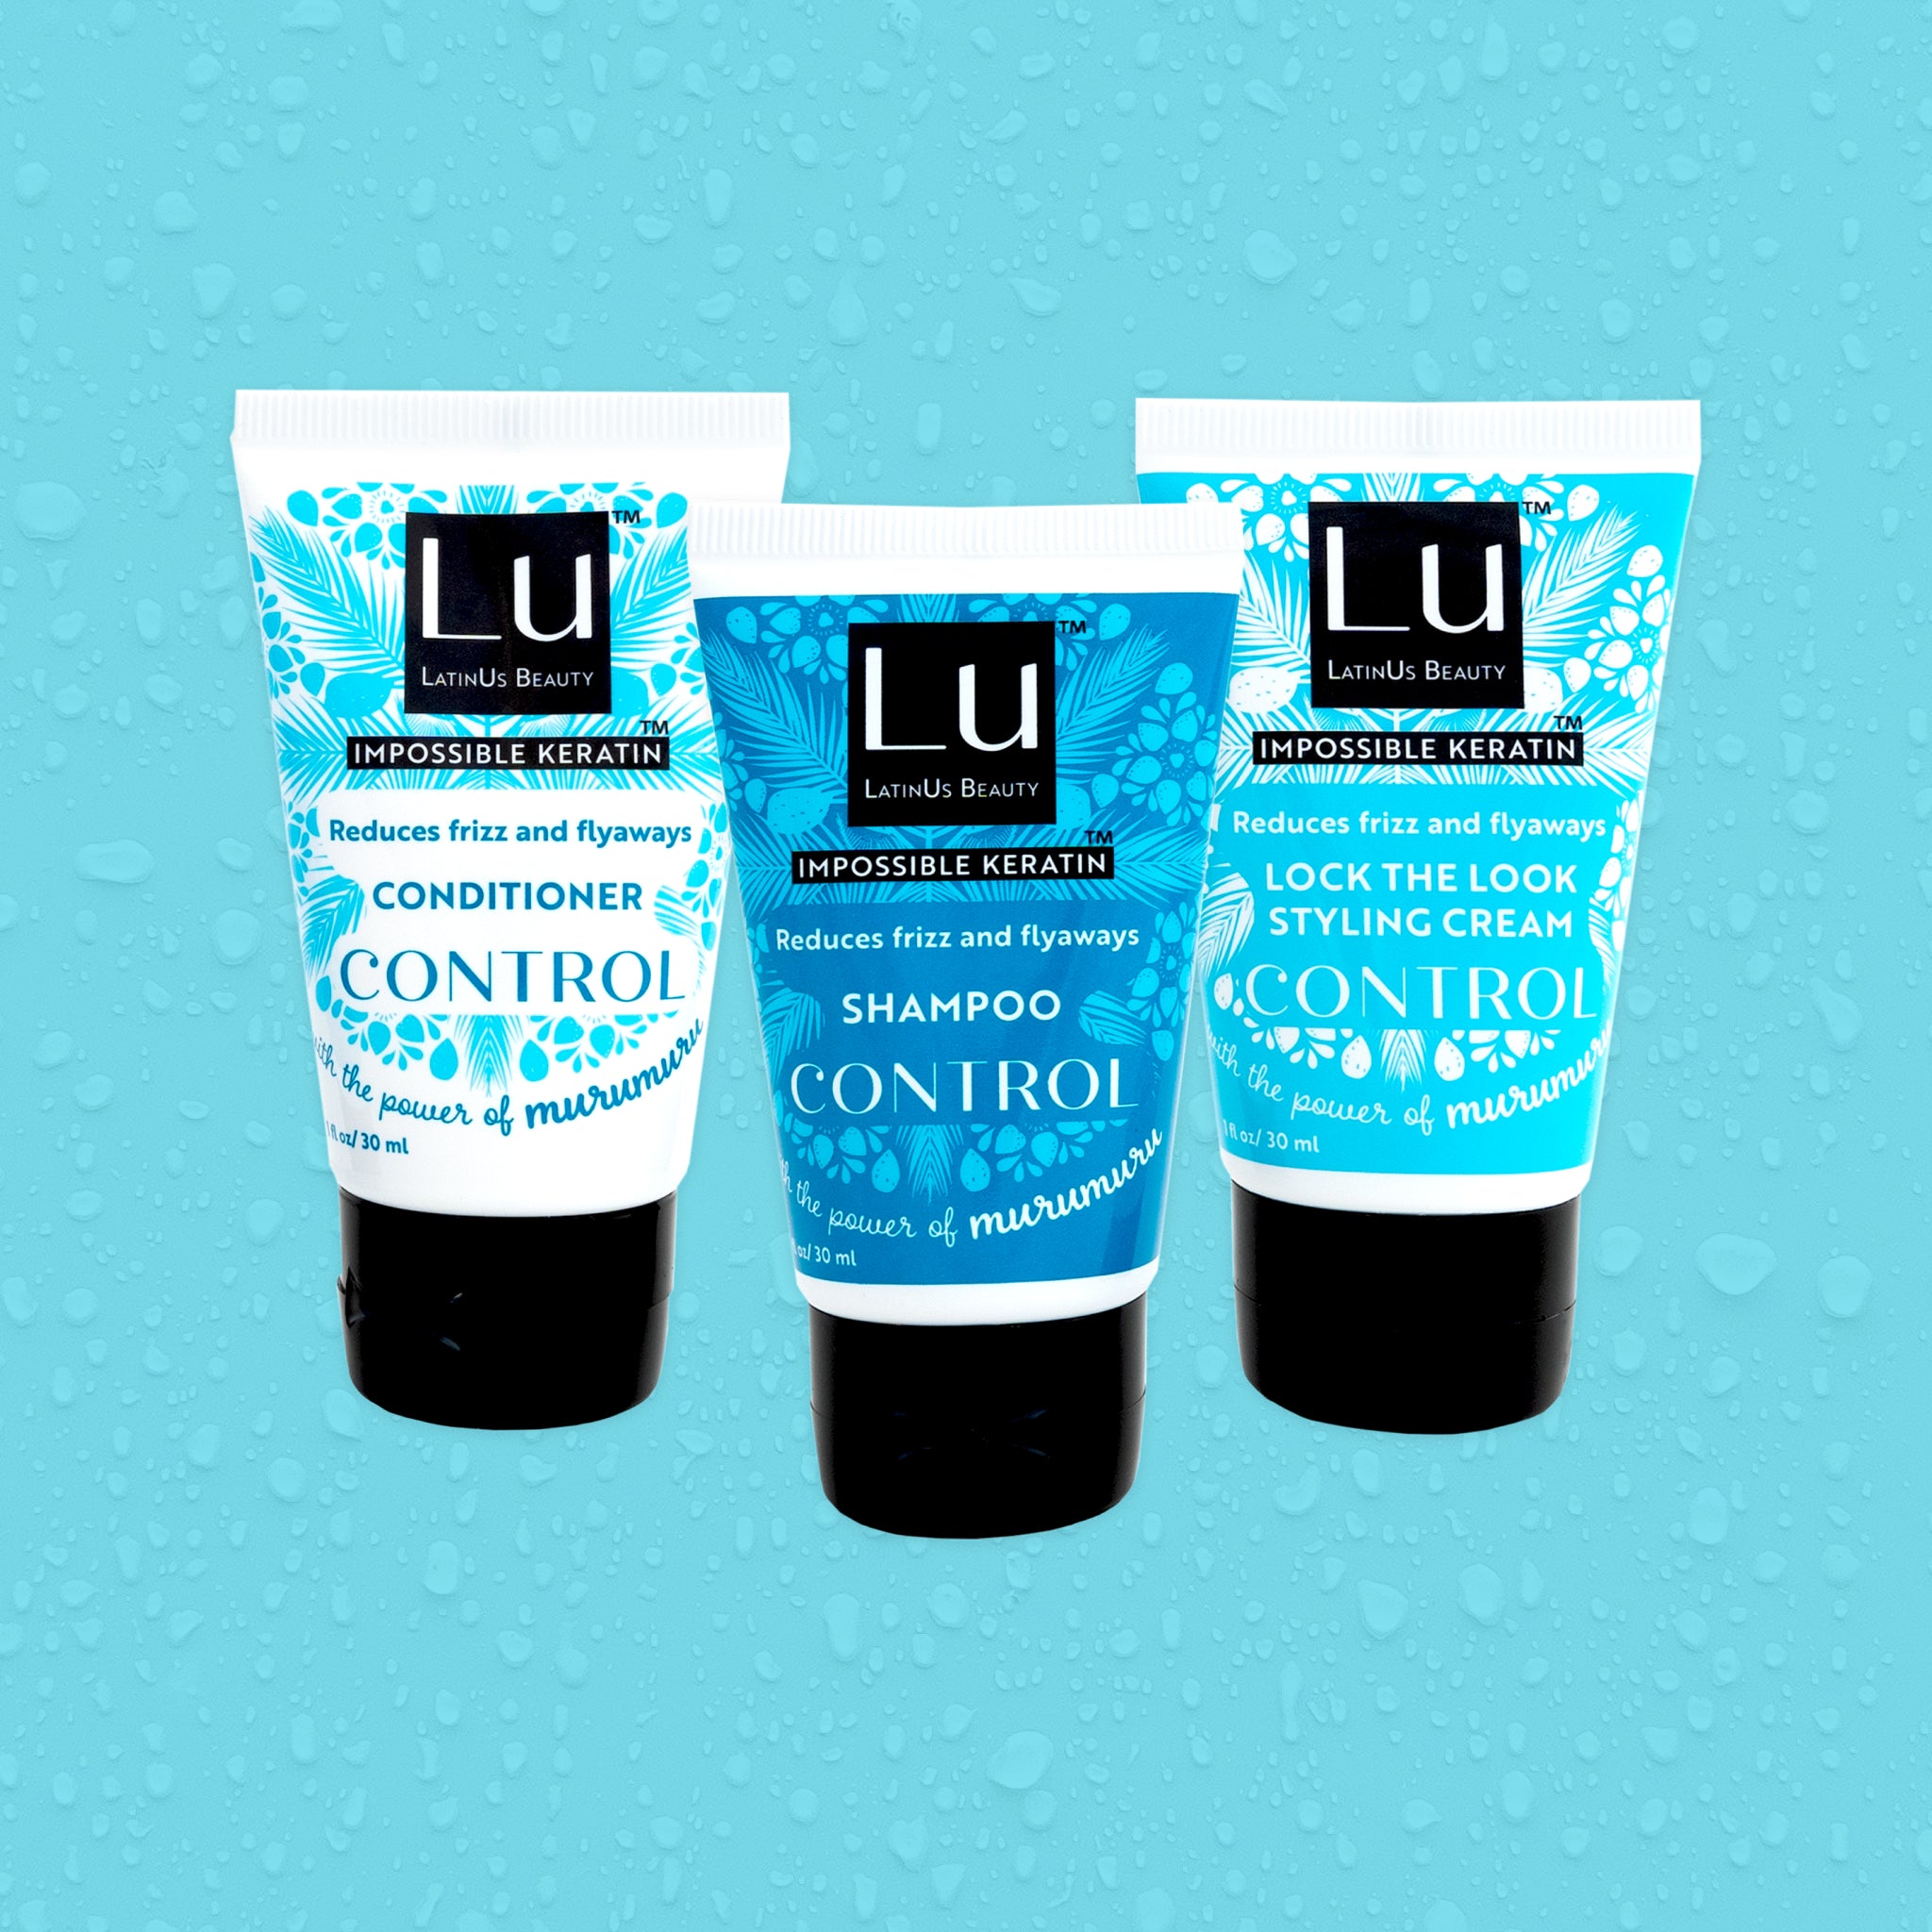 Control Starter Kit: Shampoo, Conditioner, and Styling Cream